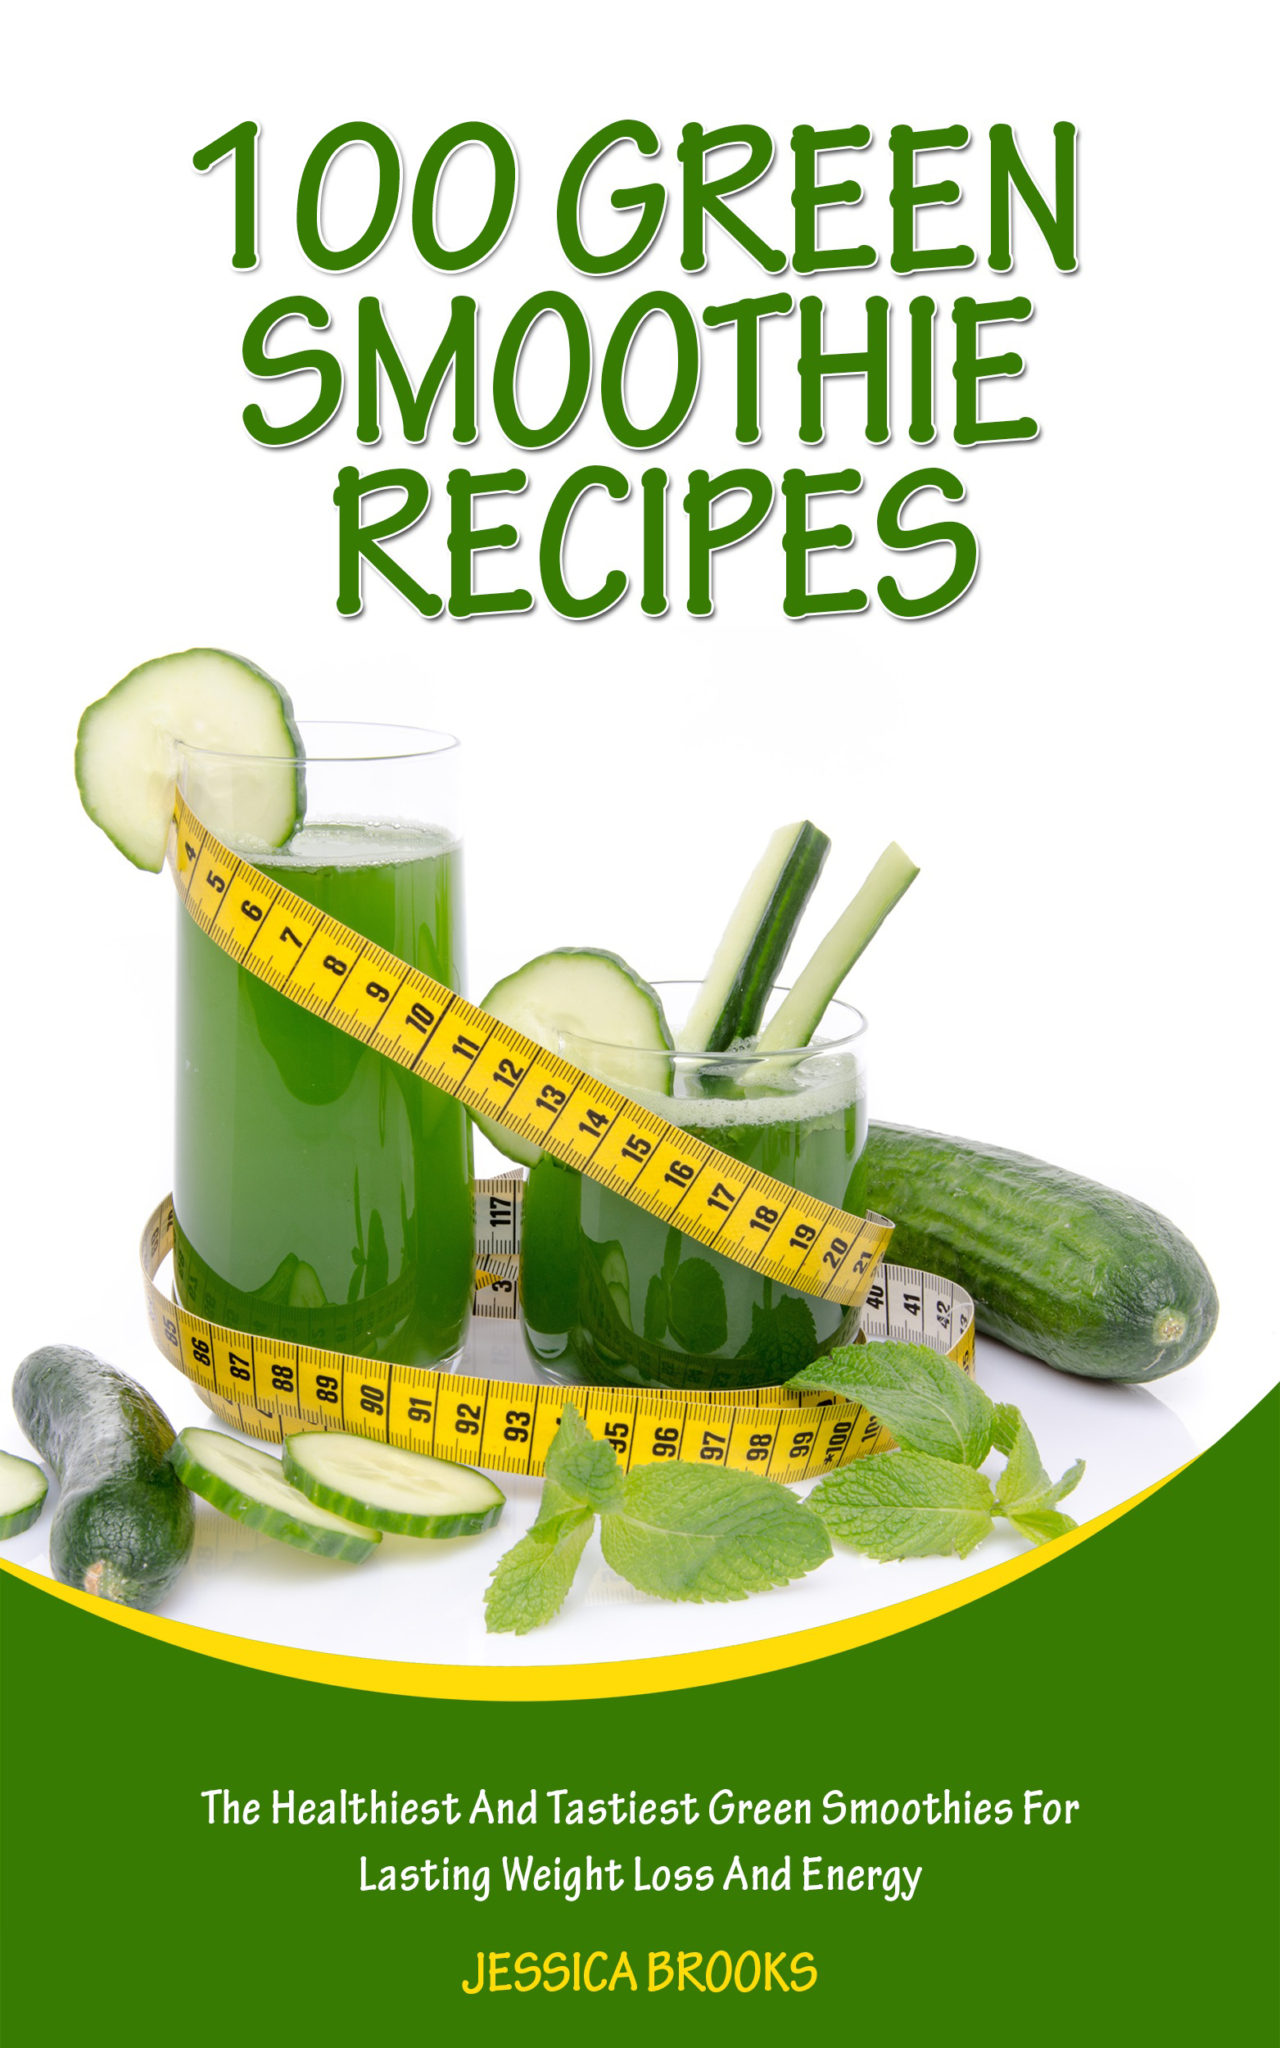 FREE: Green Smoothies: 100 Green Smoothie Recipes: The Healthiest And Tastiest Green Smoothies For Lasting Weight Loss And Energy by Jessica Brooks